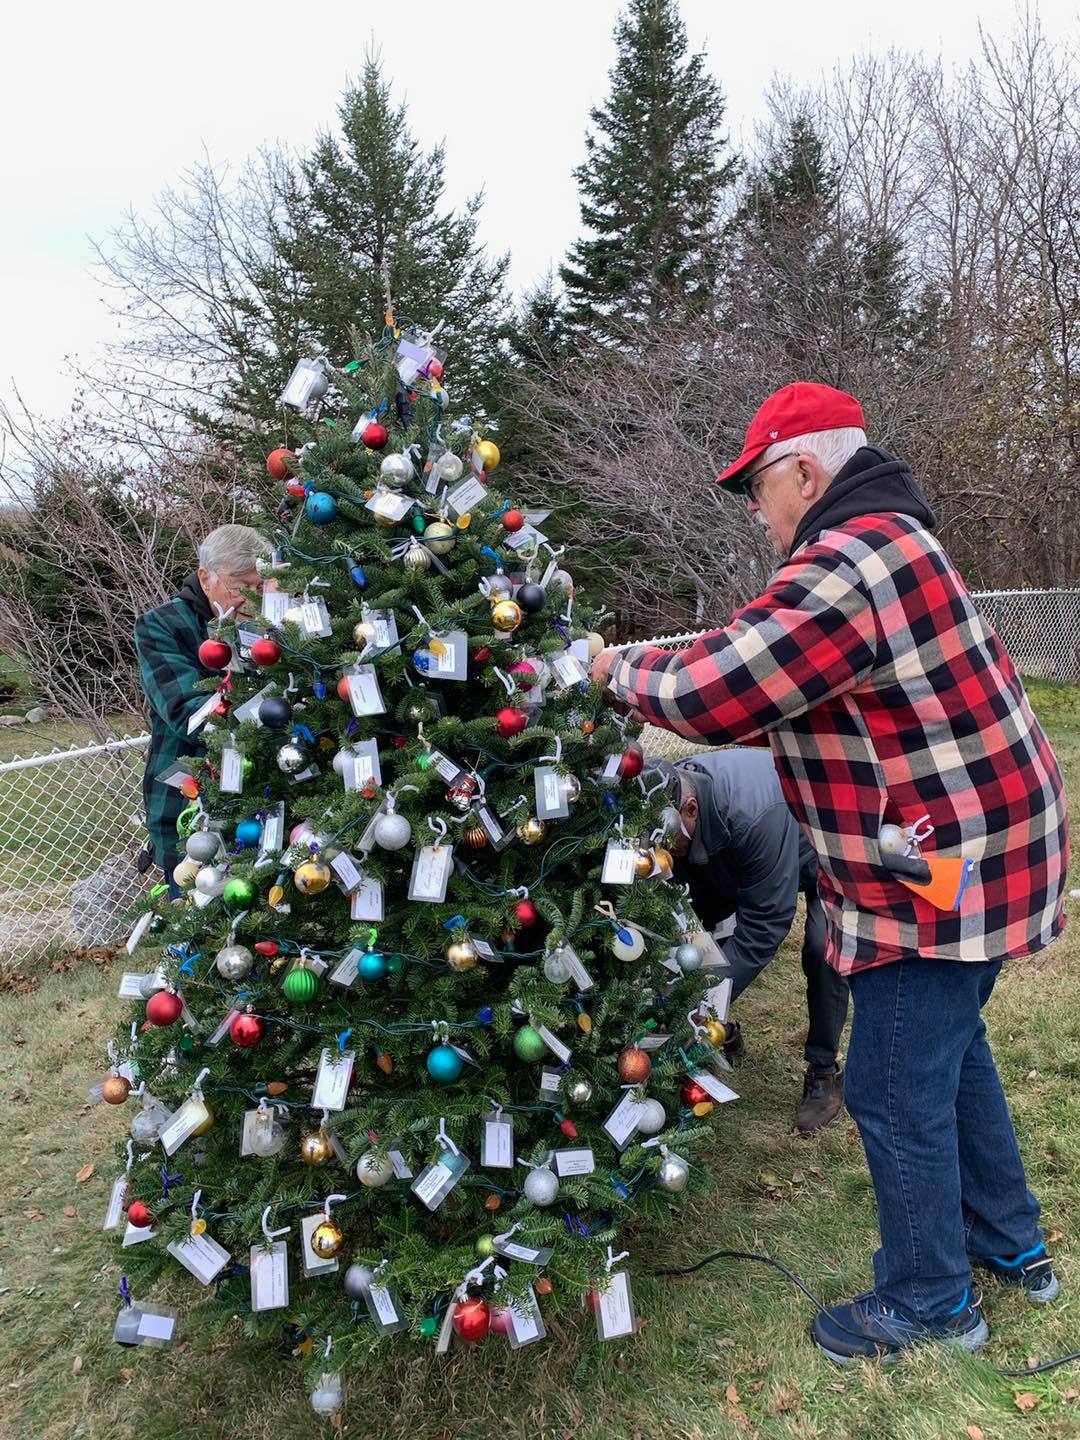 On Friday, Nov. 25th, St. Mark's Memory Tree was decorated in preparation for the Memory Tree Service on Sunday.